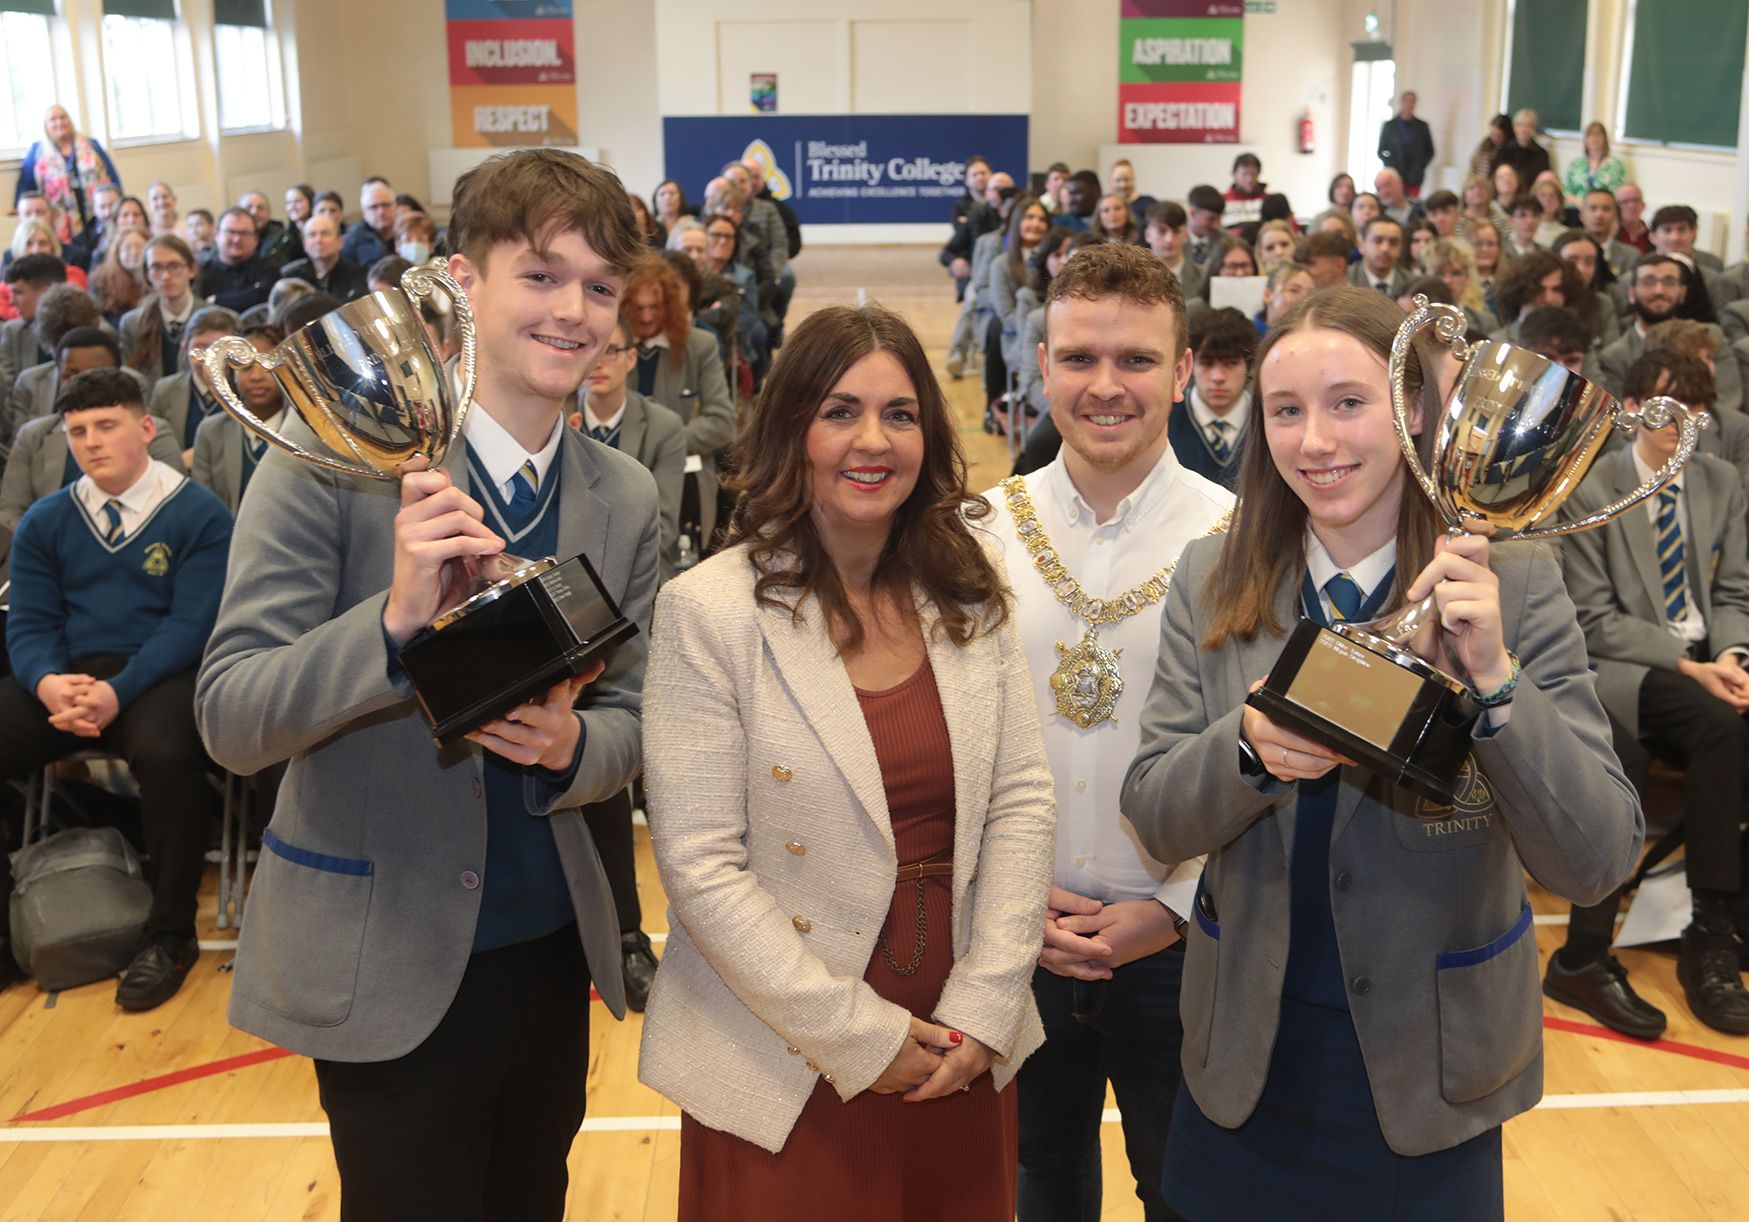 Principal's Cup winners - Conor Creagh and Megan Creighton with Principal Bernadette Lyttle and Lord Mayor Councillor Ryan Murphy